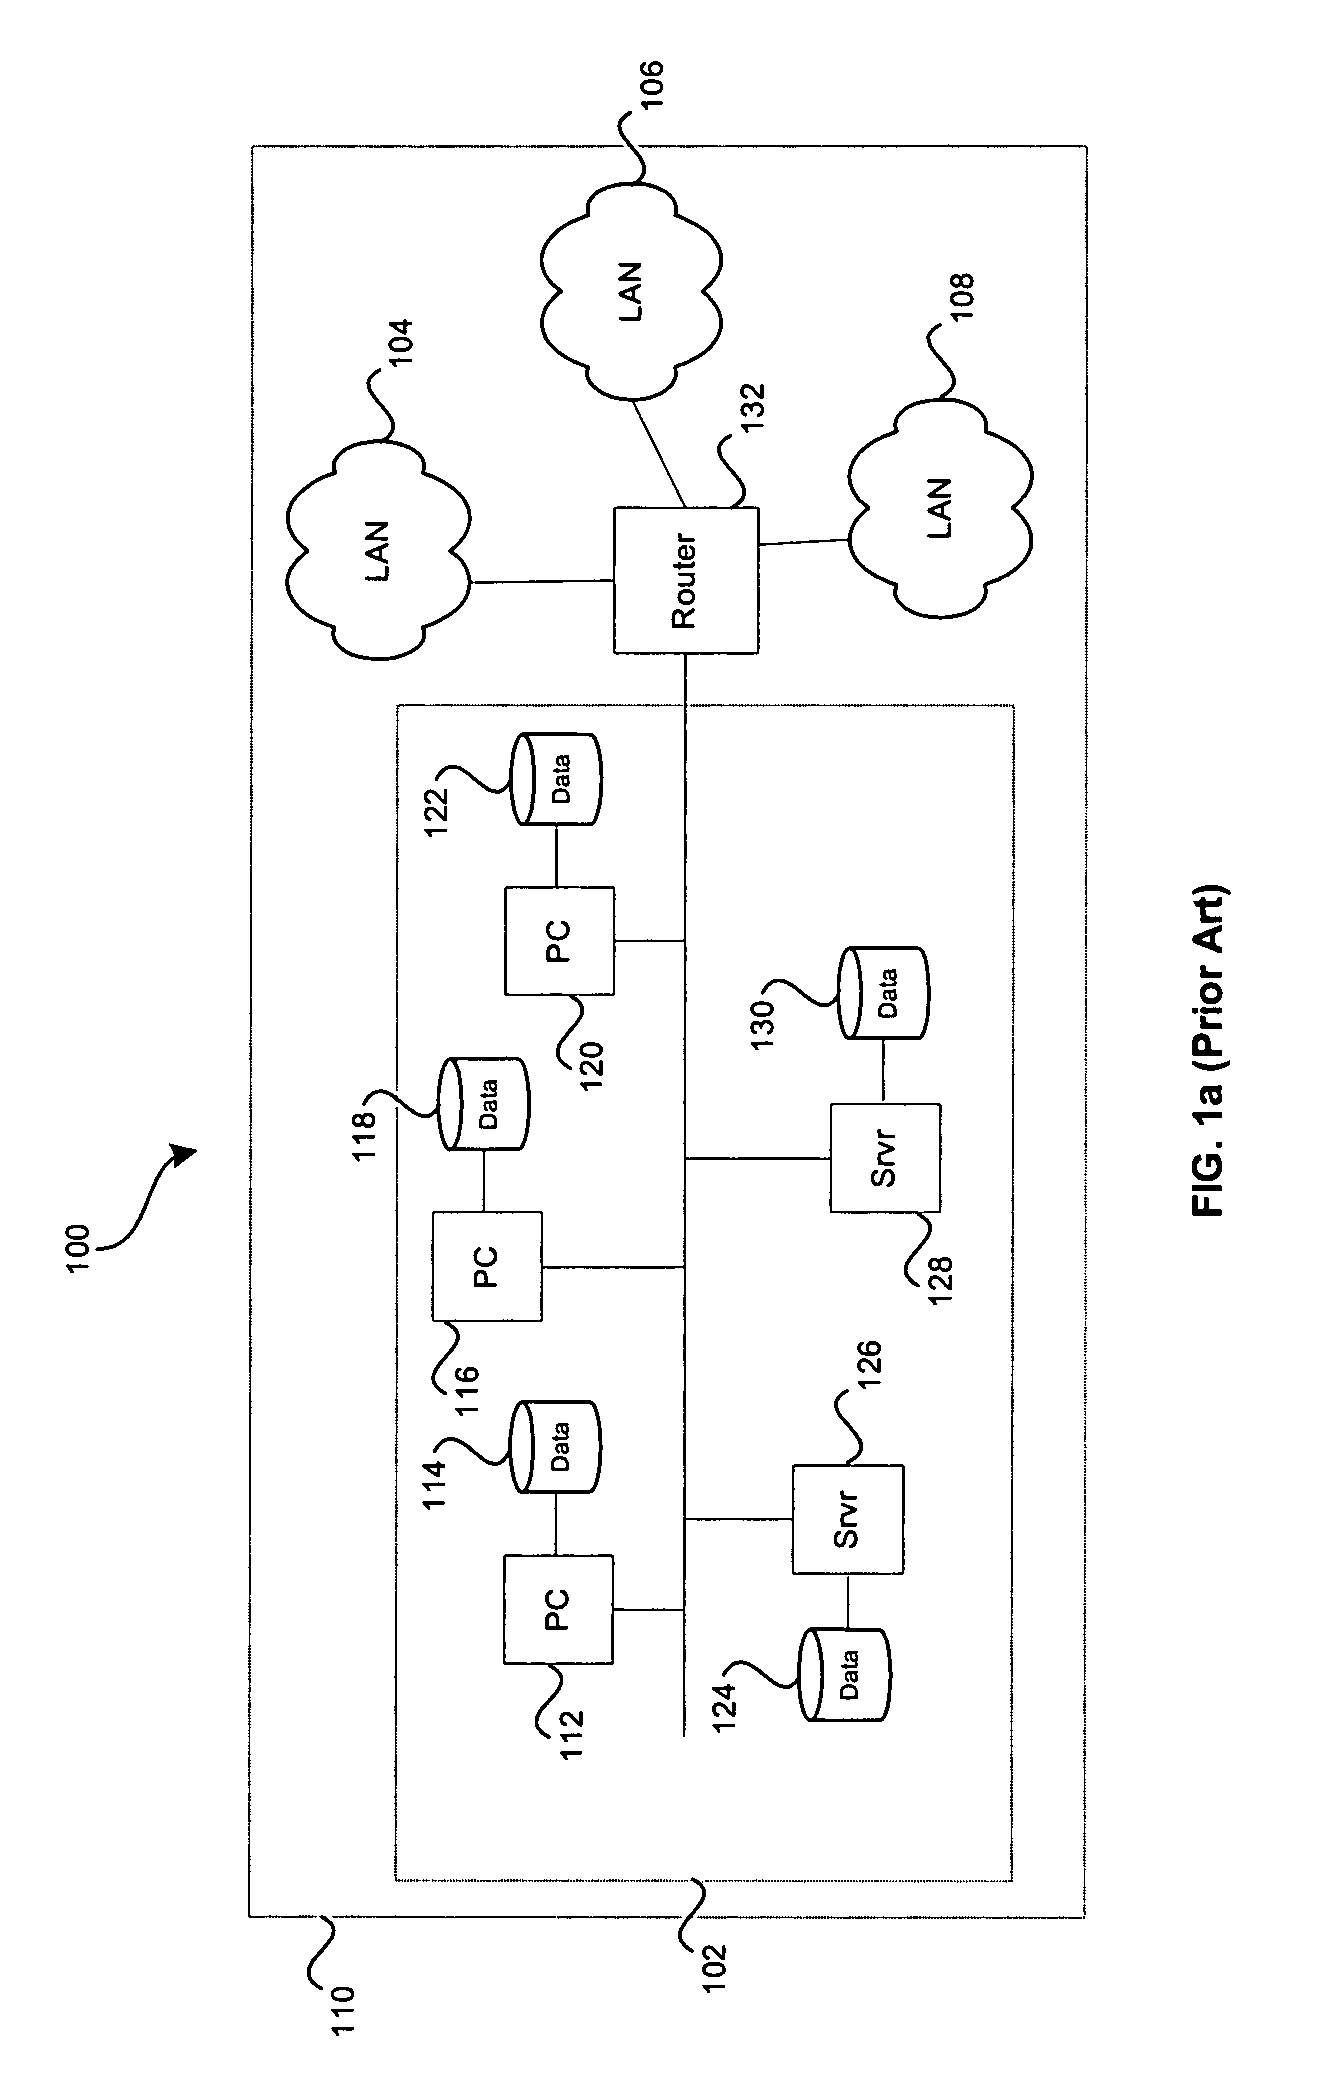 Method and system for onboard bit error rate (BER) estimation in a port bypass controller